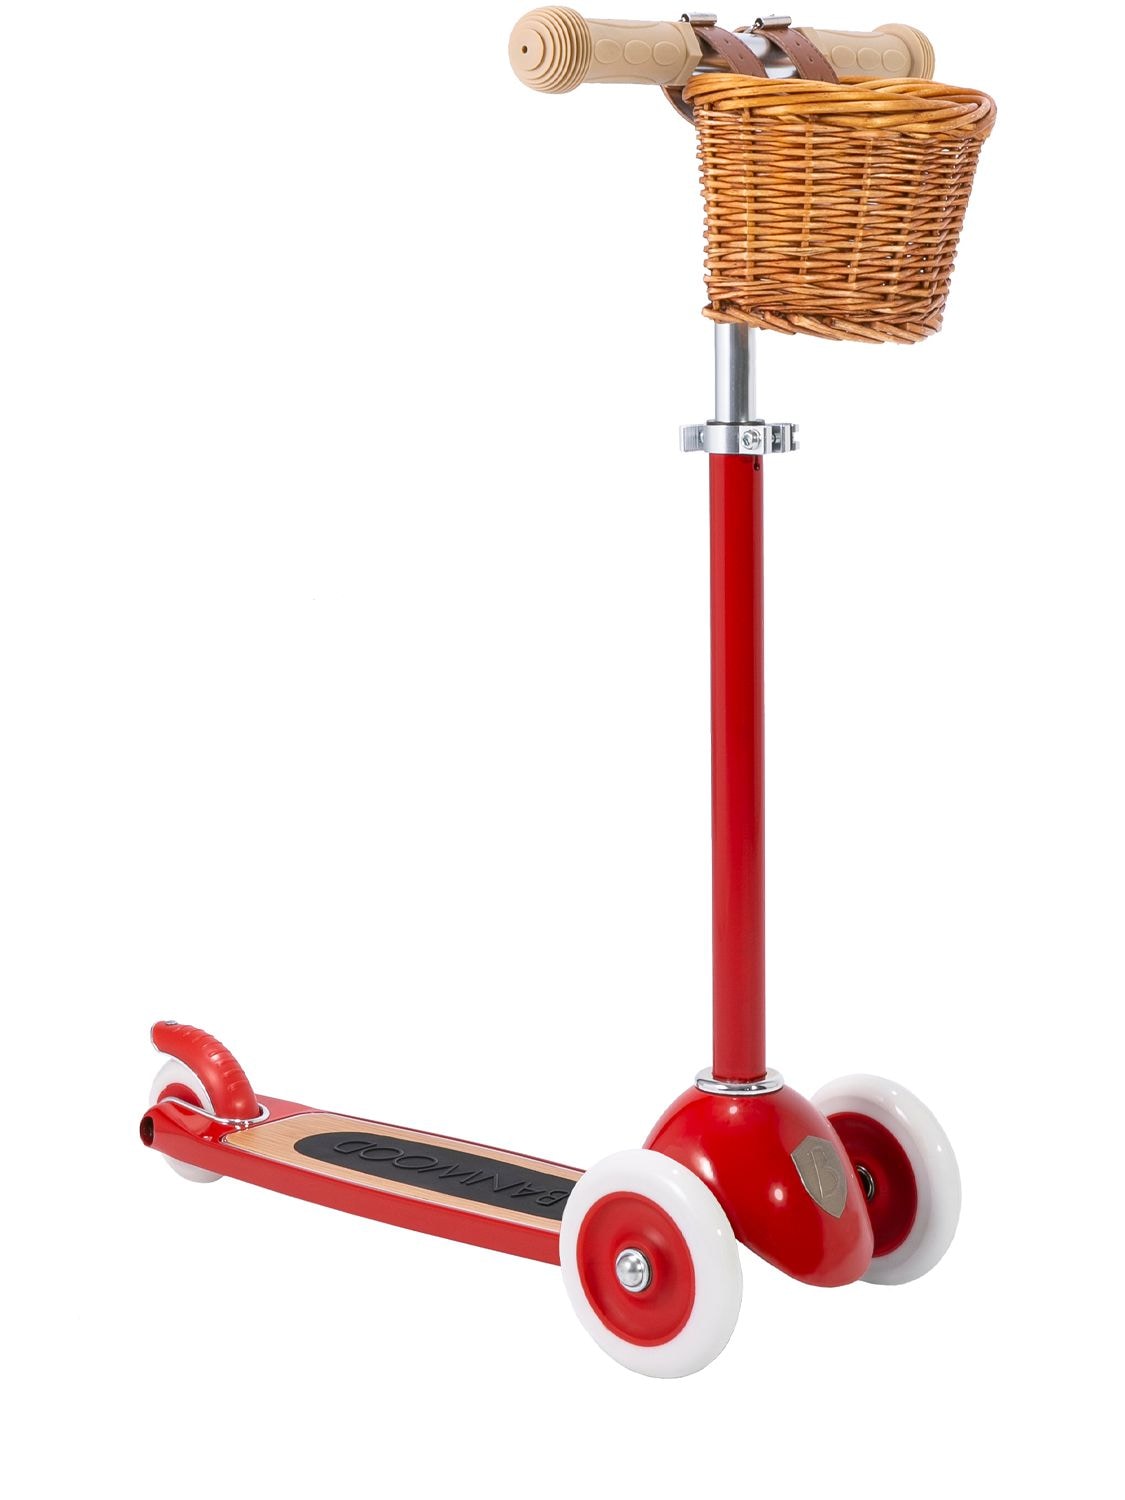 Banwood Kids' Easy Ride Scooter With Basket In Red